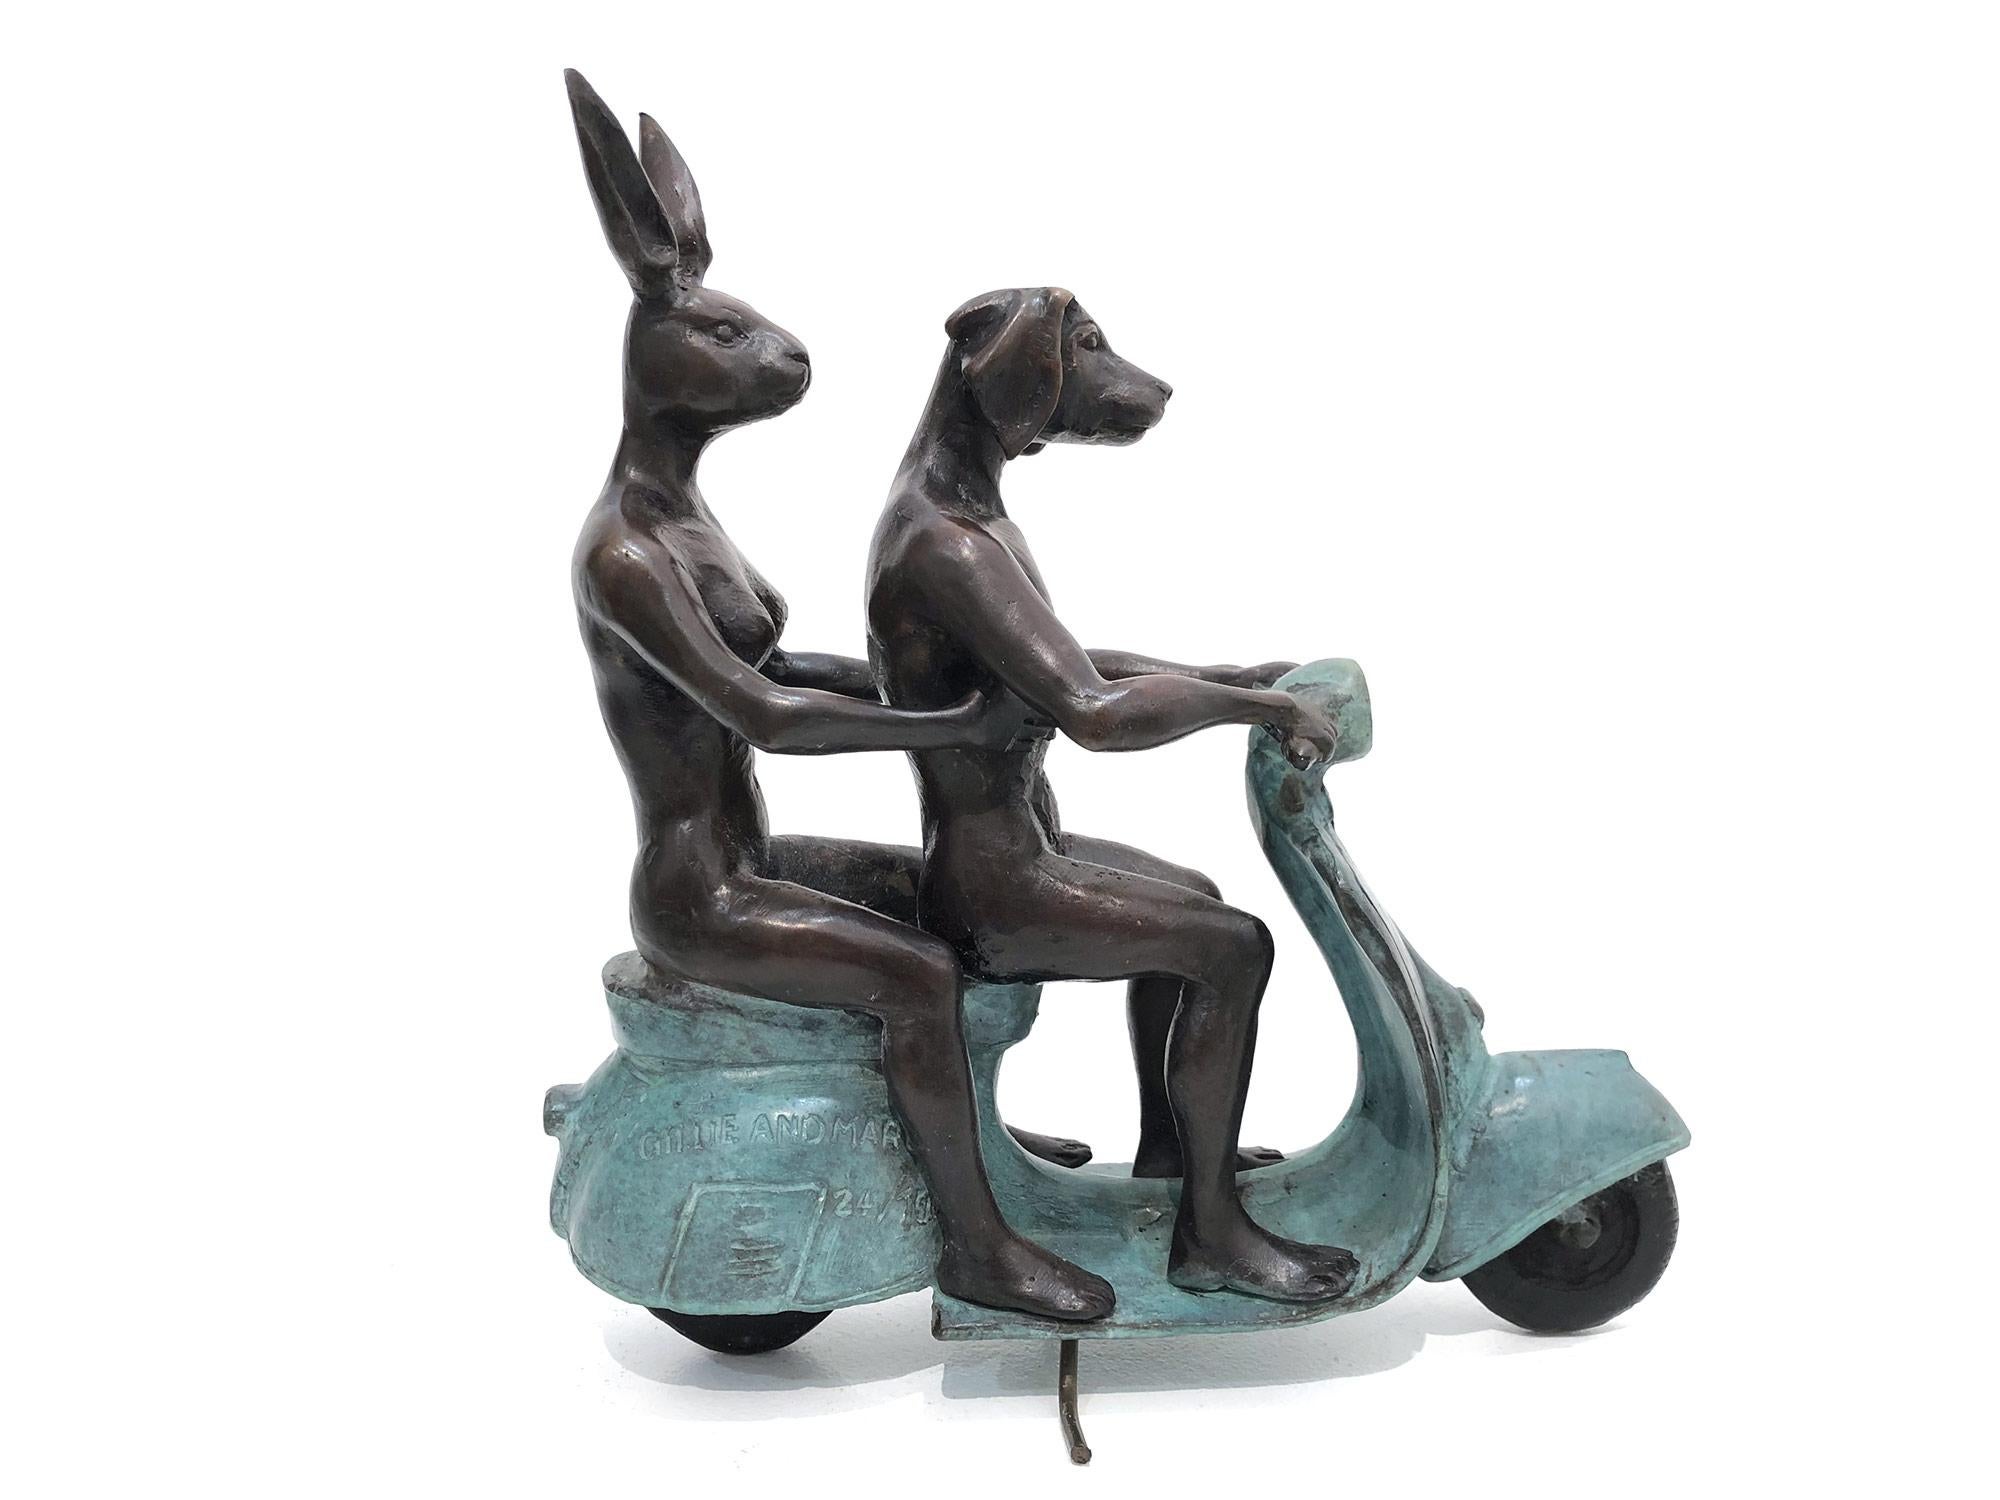 They were the Authentic Vespa Riders in Rome (Bronze with Green Patina) - Gold Abstract Sculpture by Gillie and Marc Schattner